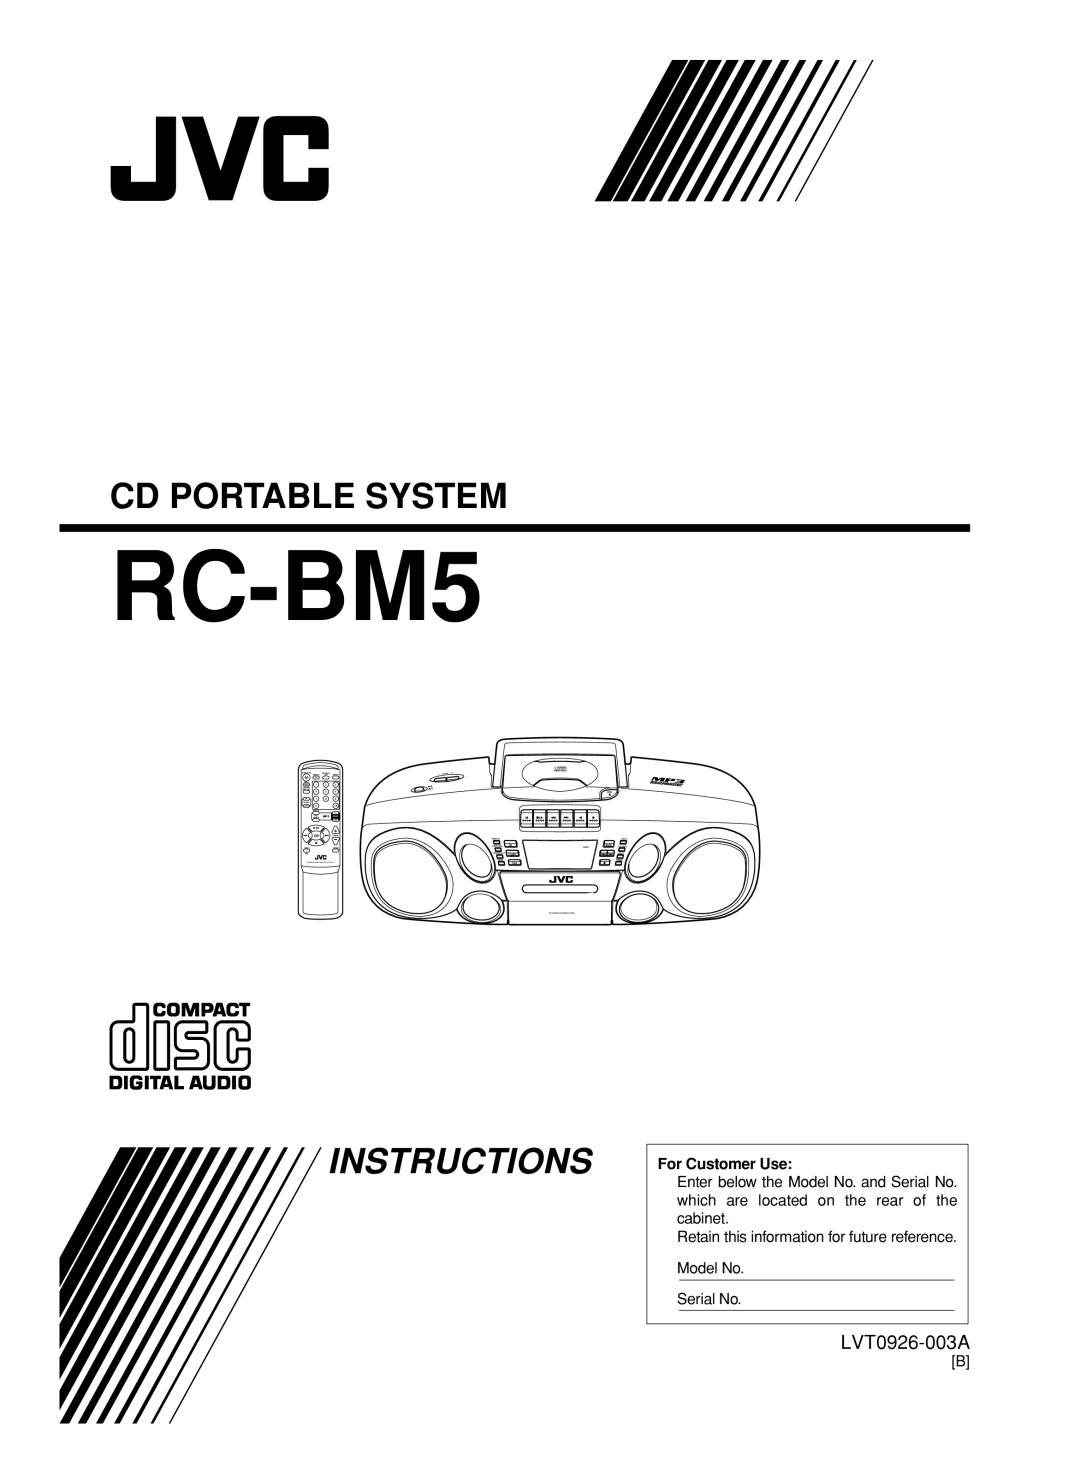 JVC RC-BM5 manual Cd Portable System, Instructions, LVT0926-001A, For Customer Use, Model No Serial No, Tuner, Tape 